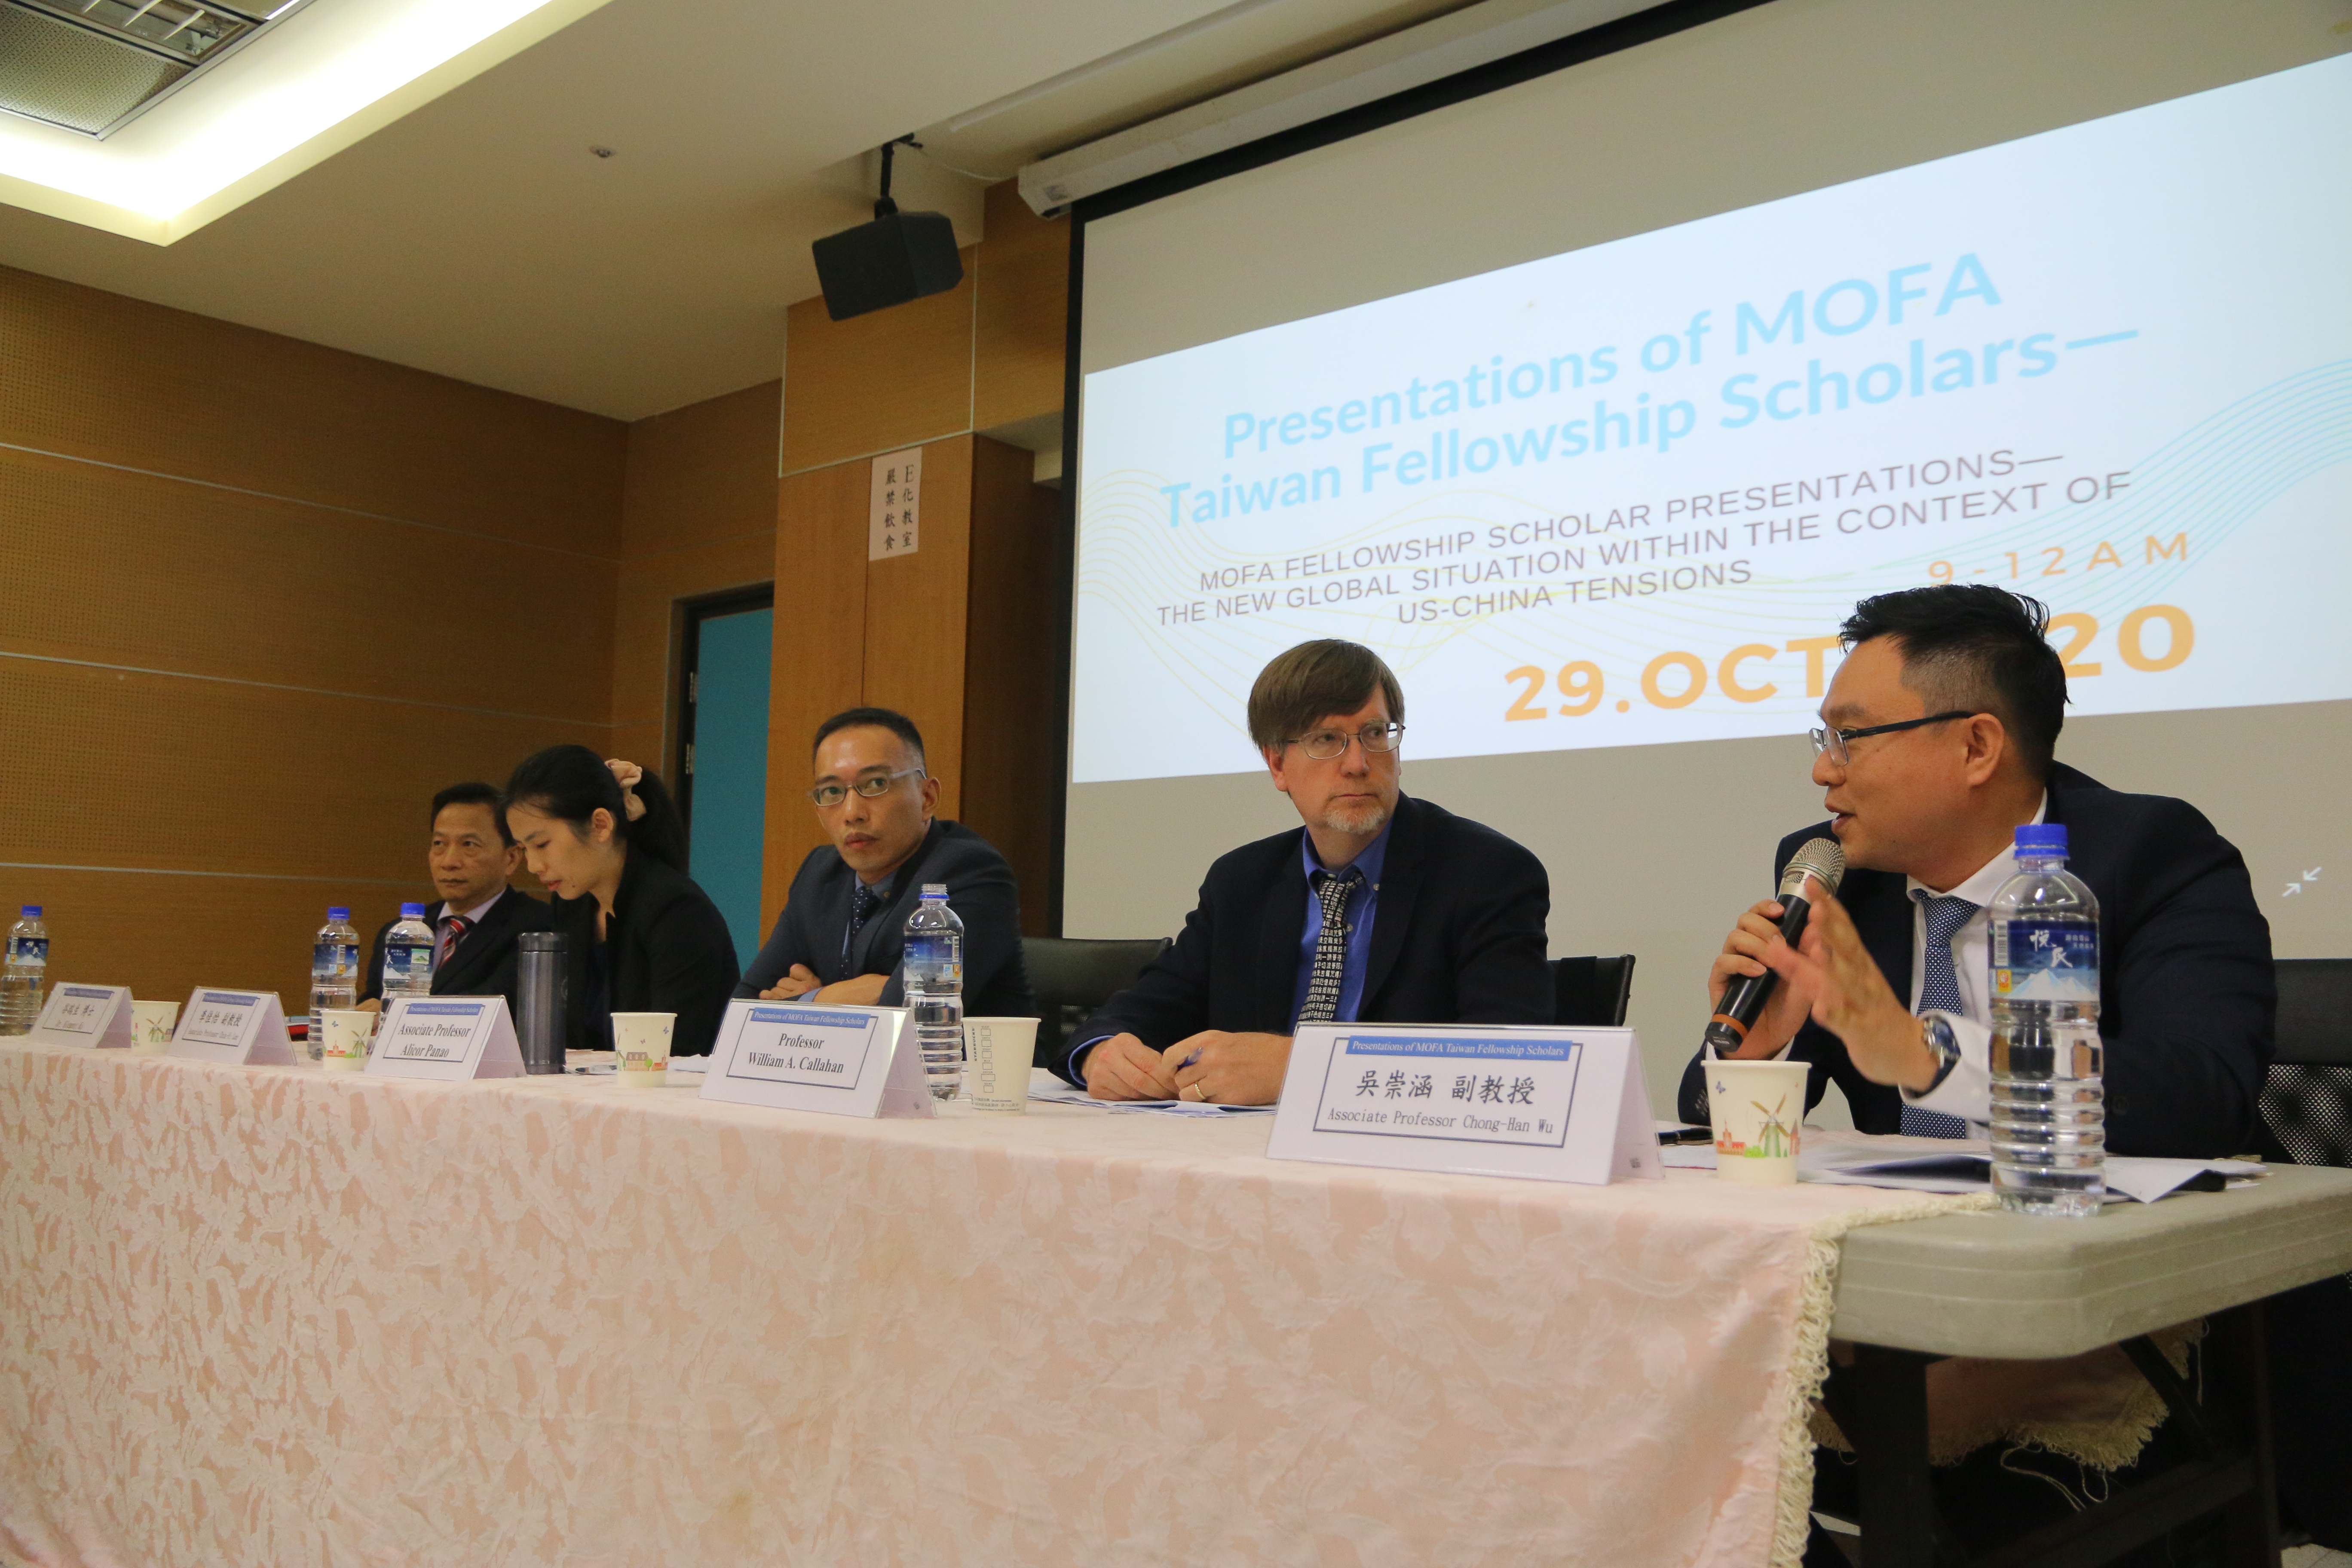 2020 Presentations of MOFA Taiwan Fellowship Scholars—The New Global Situation within the Context of US-China Tensions:picture8